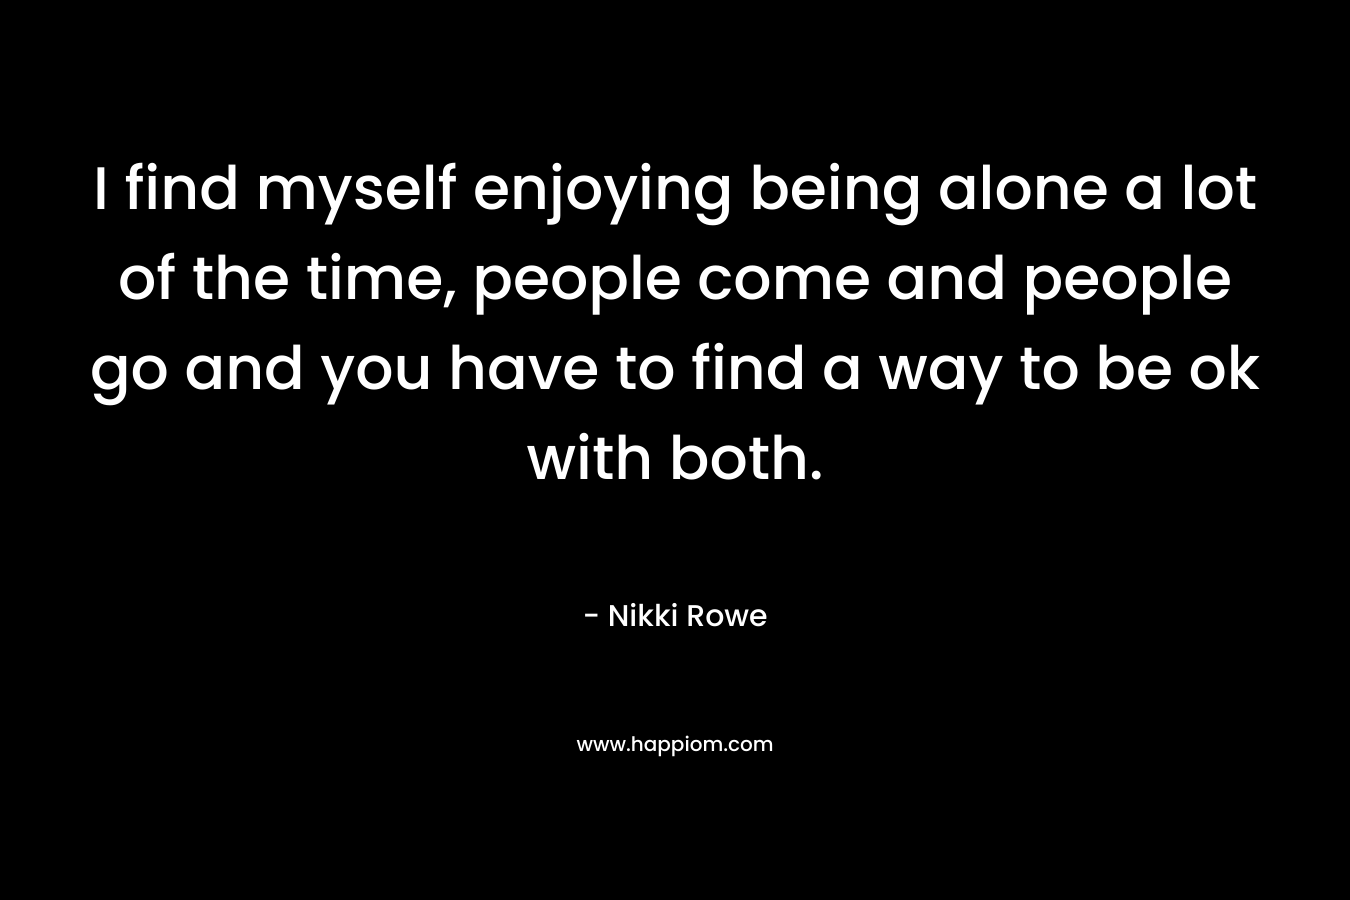 I find myself enjoying being alone a lot of the time, people come and people go and you have to find a way to be ok with both.